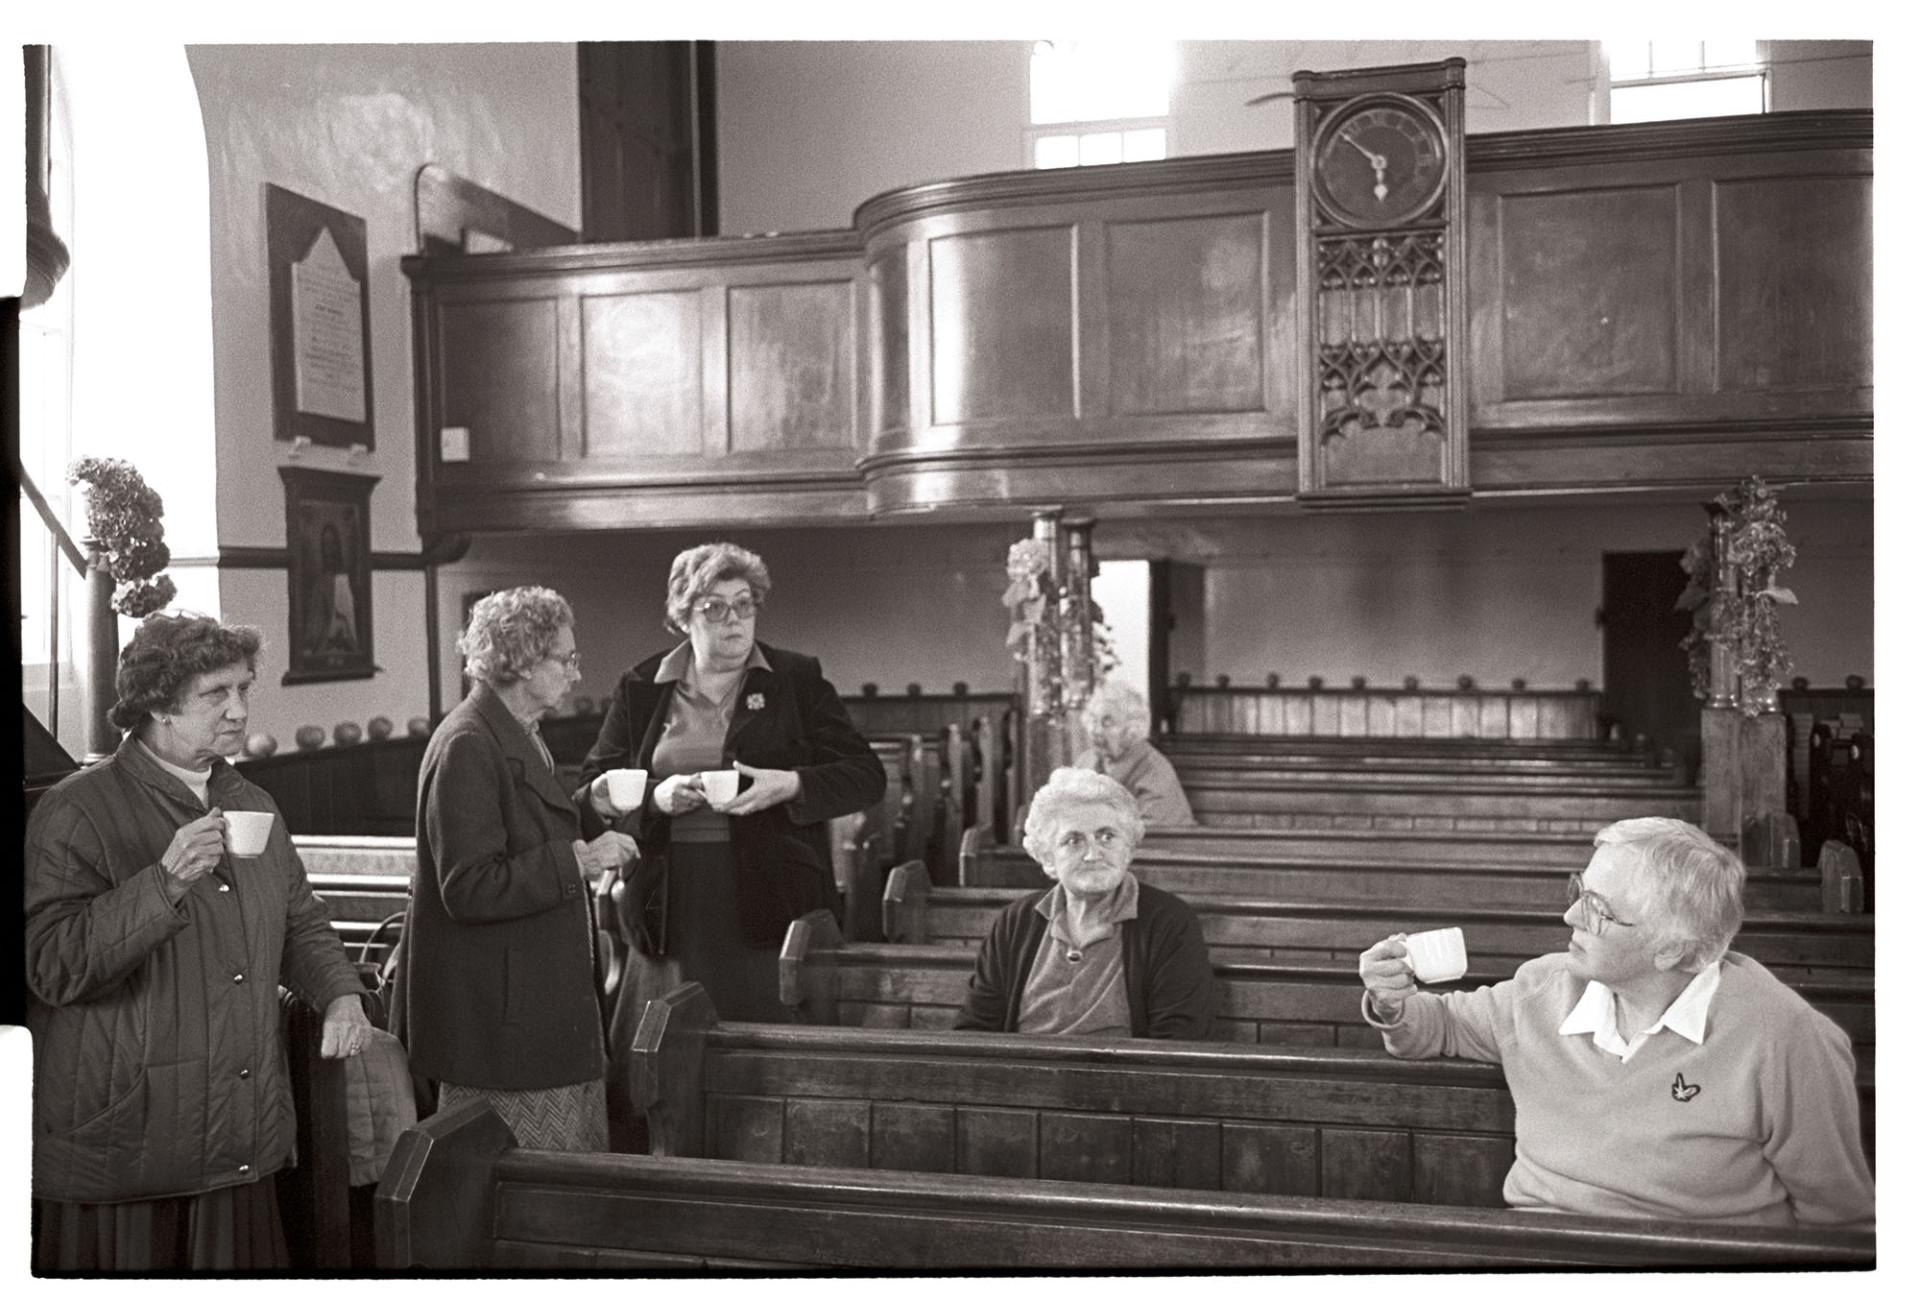 Congregational chapel interior tea or coffee break for people decorating at Harvest Festival. 
[Women, including Elaine Marsh the Minister, having a tea break after decorating Chulmleigh Congregational Chapel for the harvest festival. They are sat in pews and a gallery or balcony with a clock can be seen in the background.]